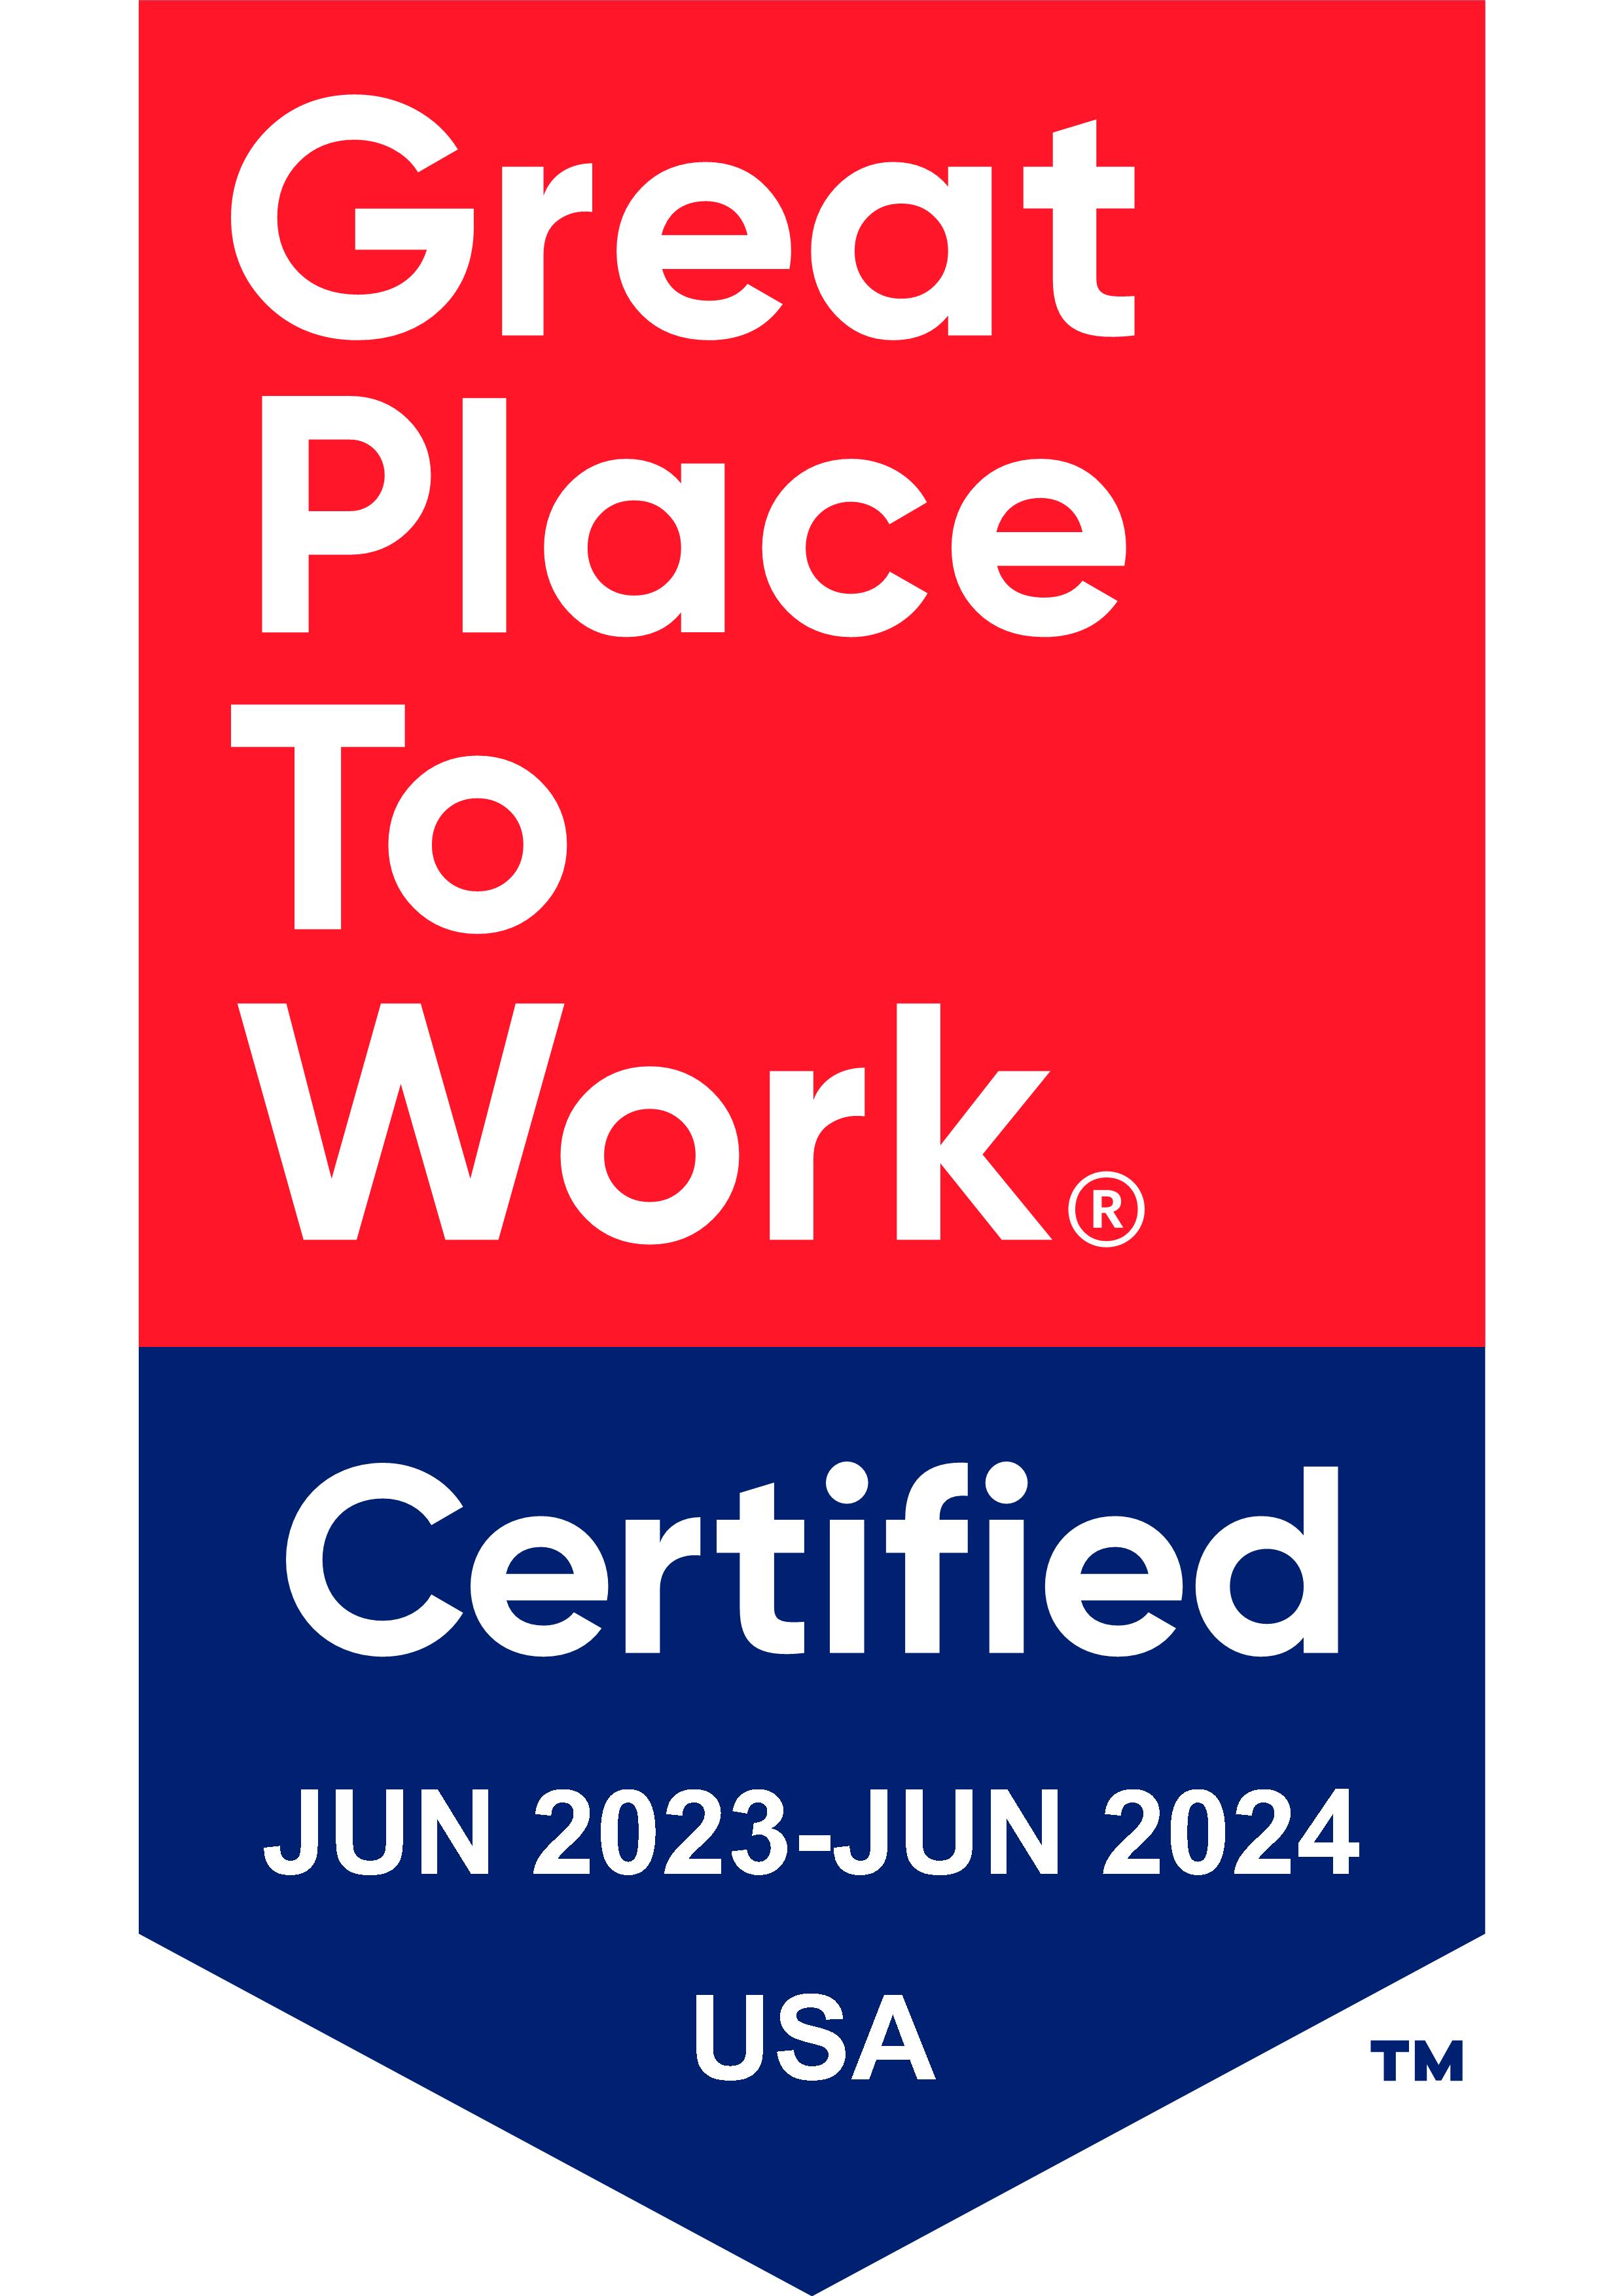 Great Place To Work | Certified | Jul 2019 - Jul 2023 USA